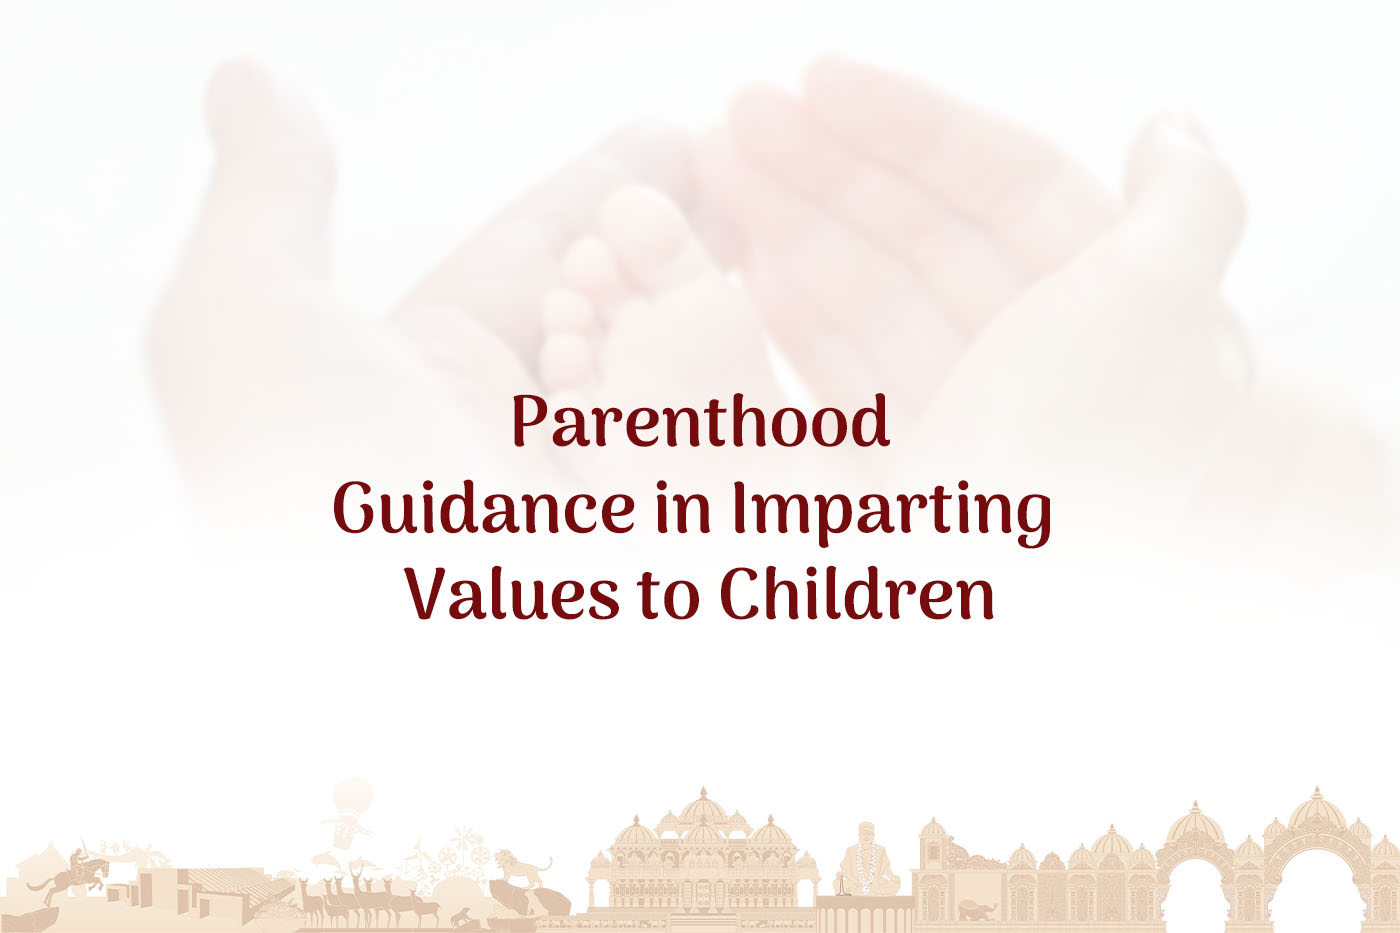 Parenthood – Guidance in Imparting Values to Children